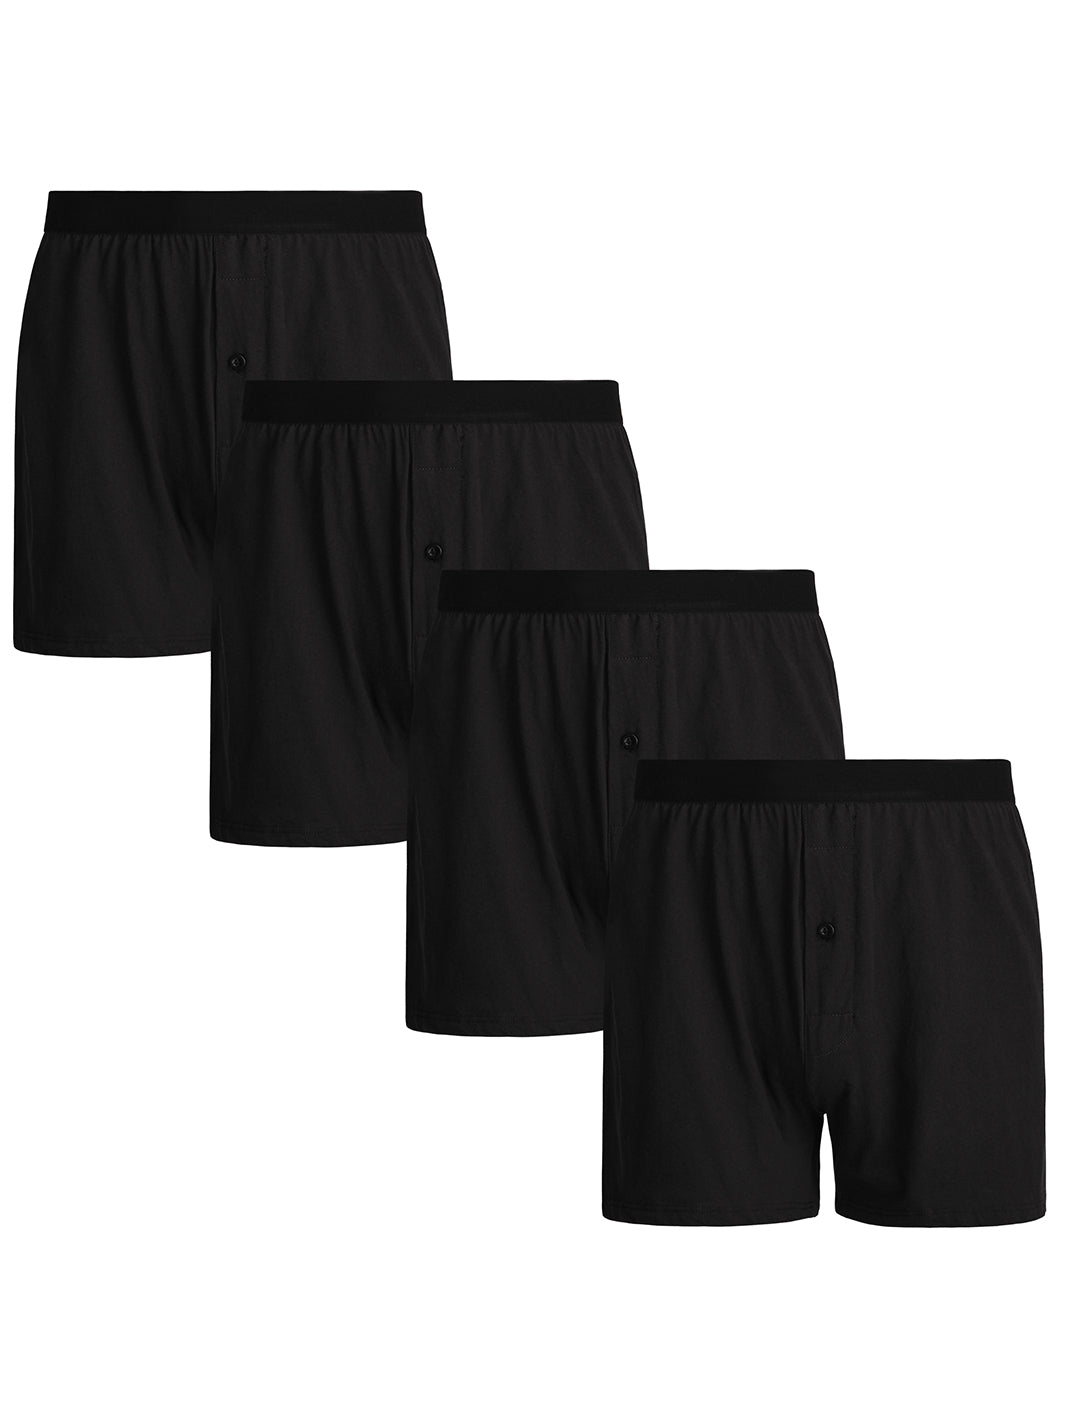 Men's Boxer Briefs for sale in Dunreith, Indiana